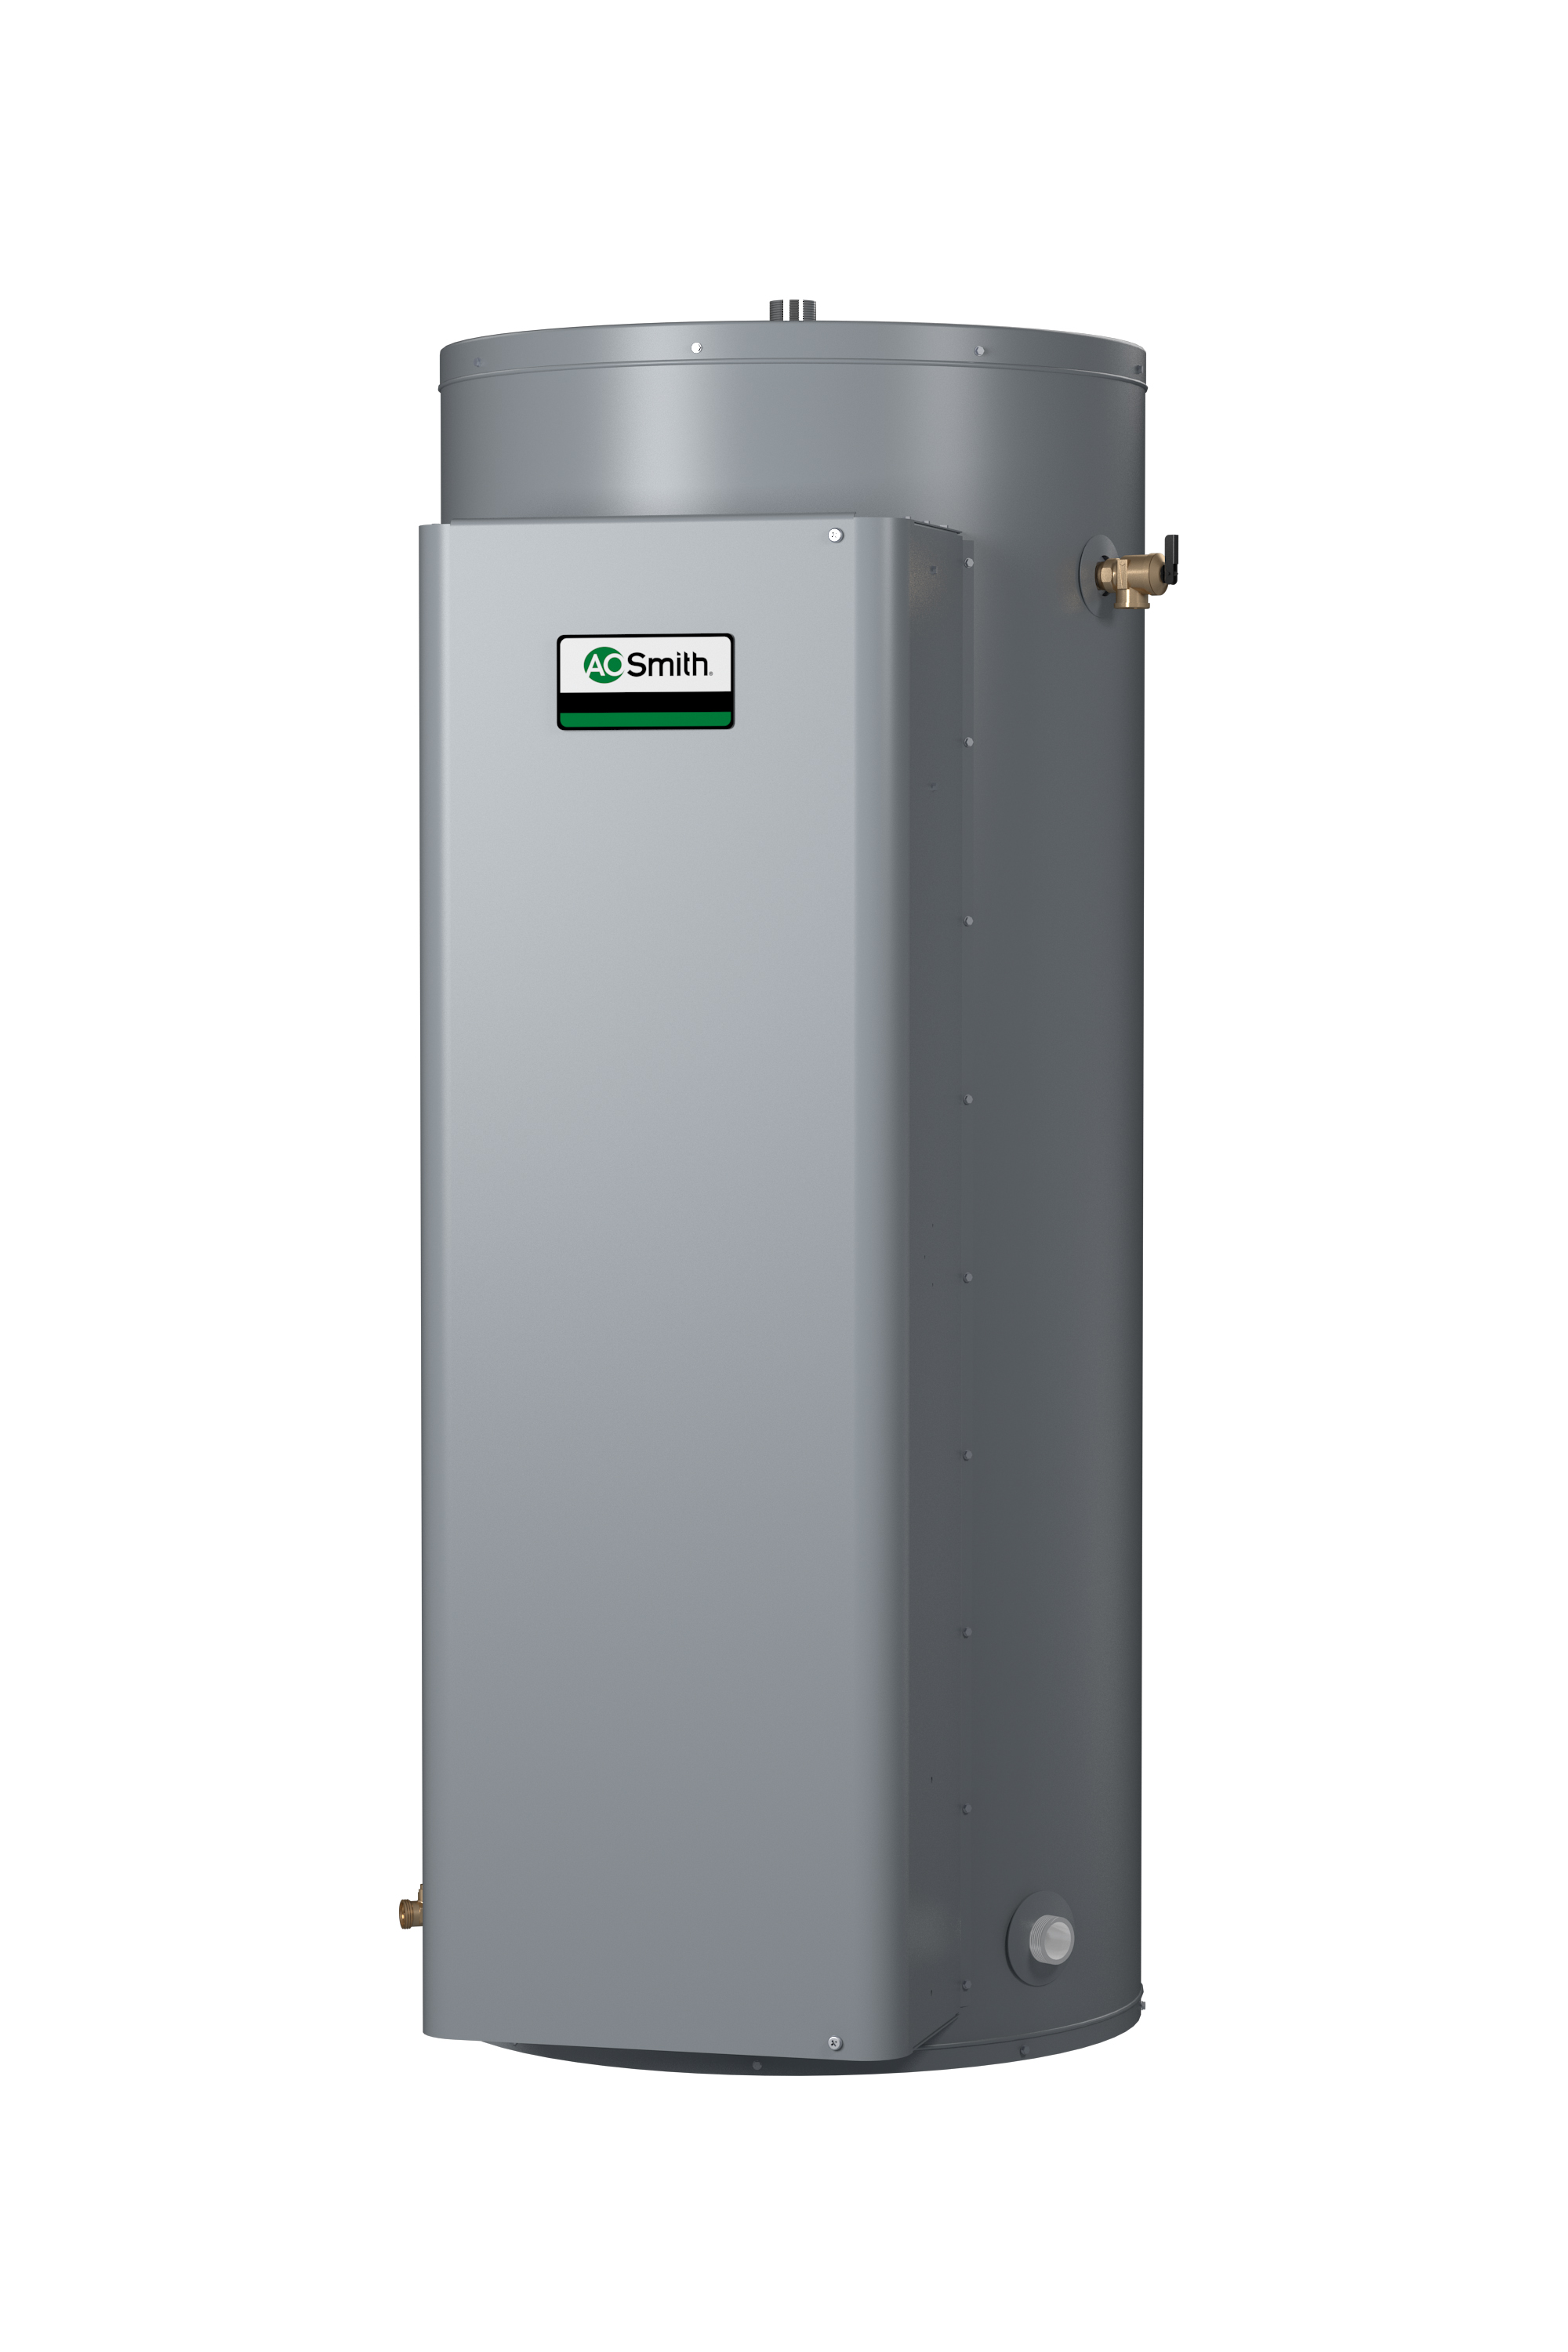 AO Smith DVE Water Heater Electric